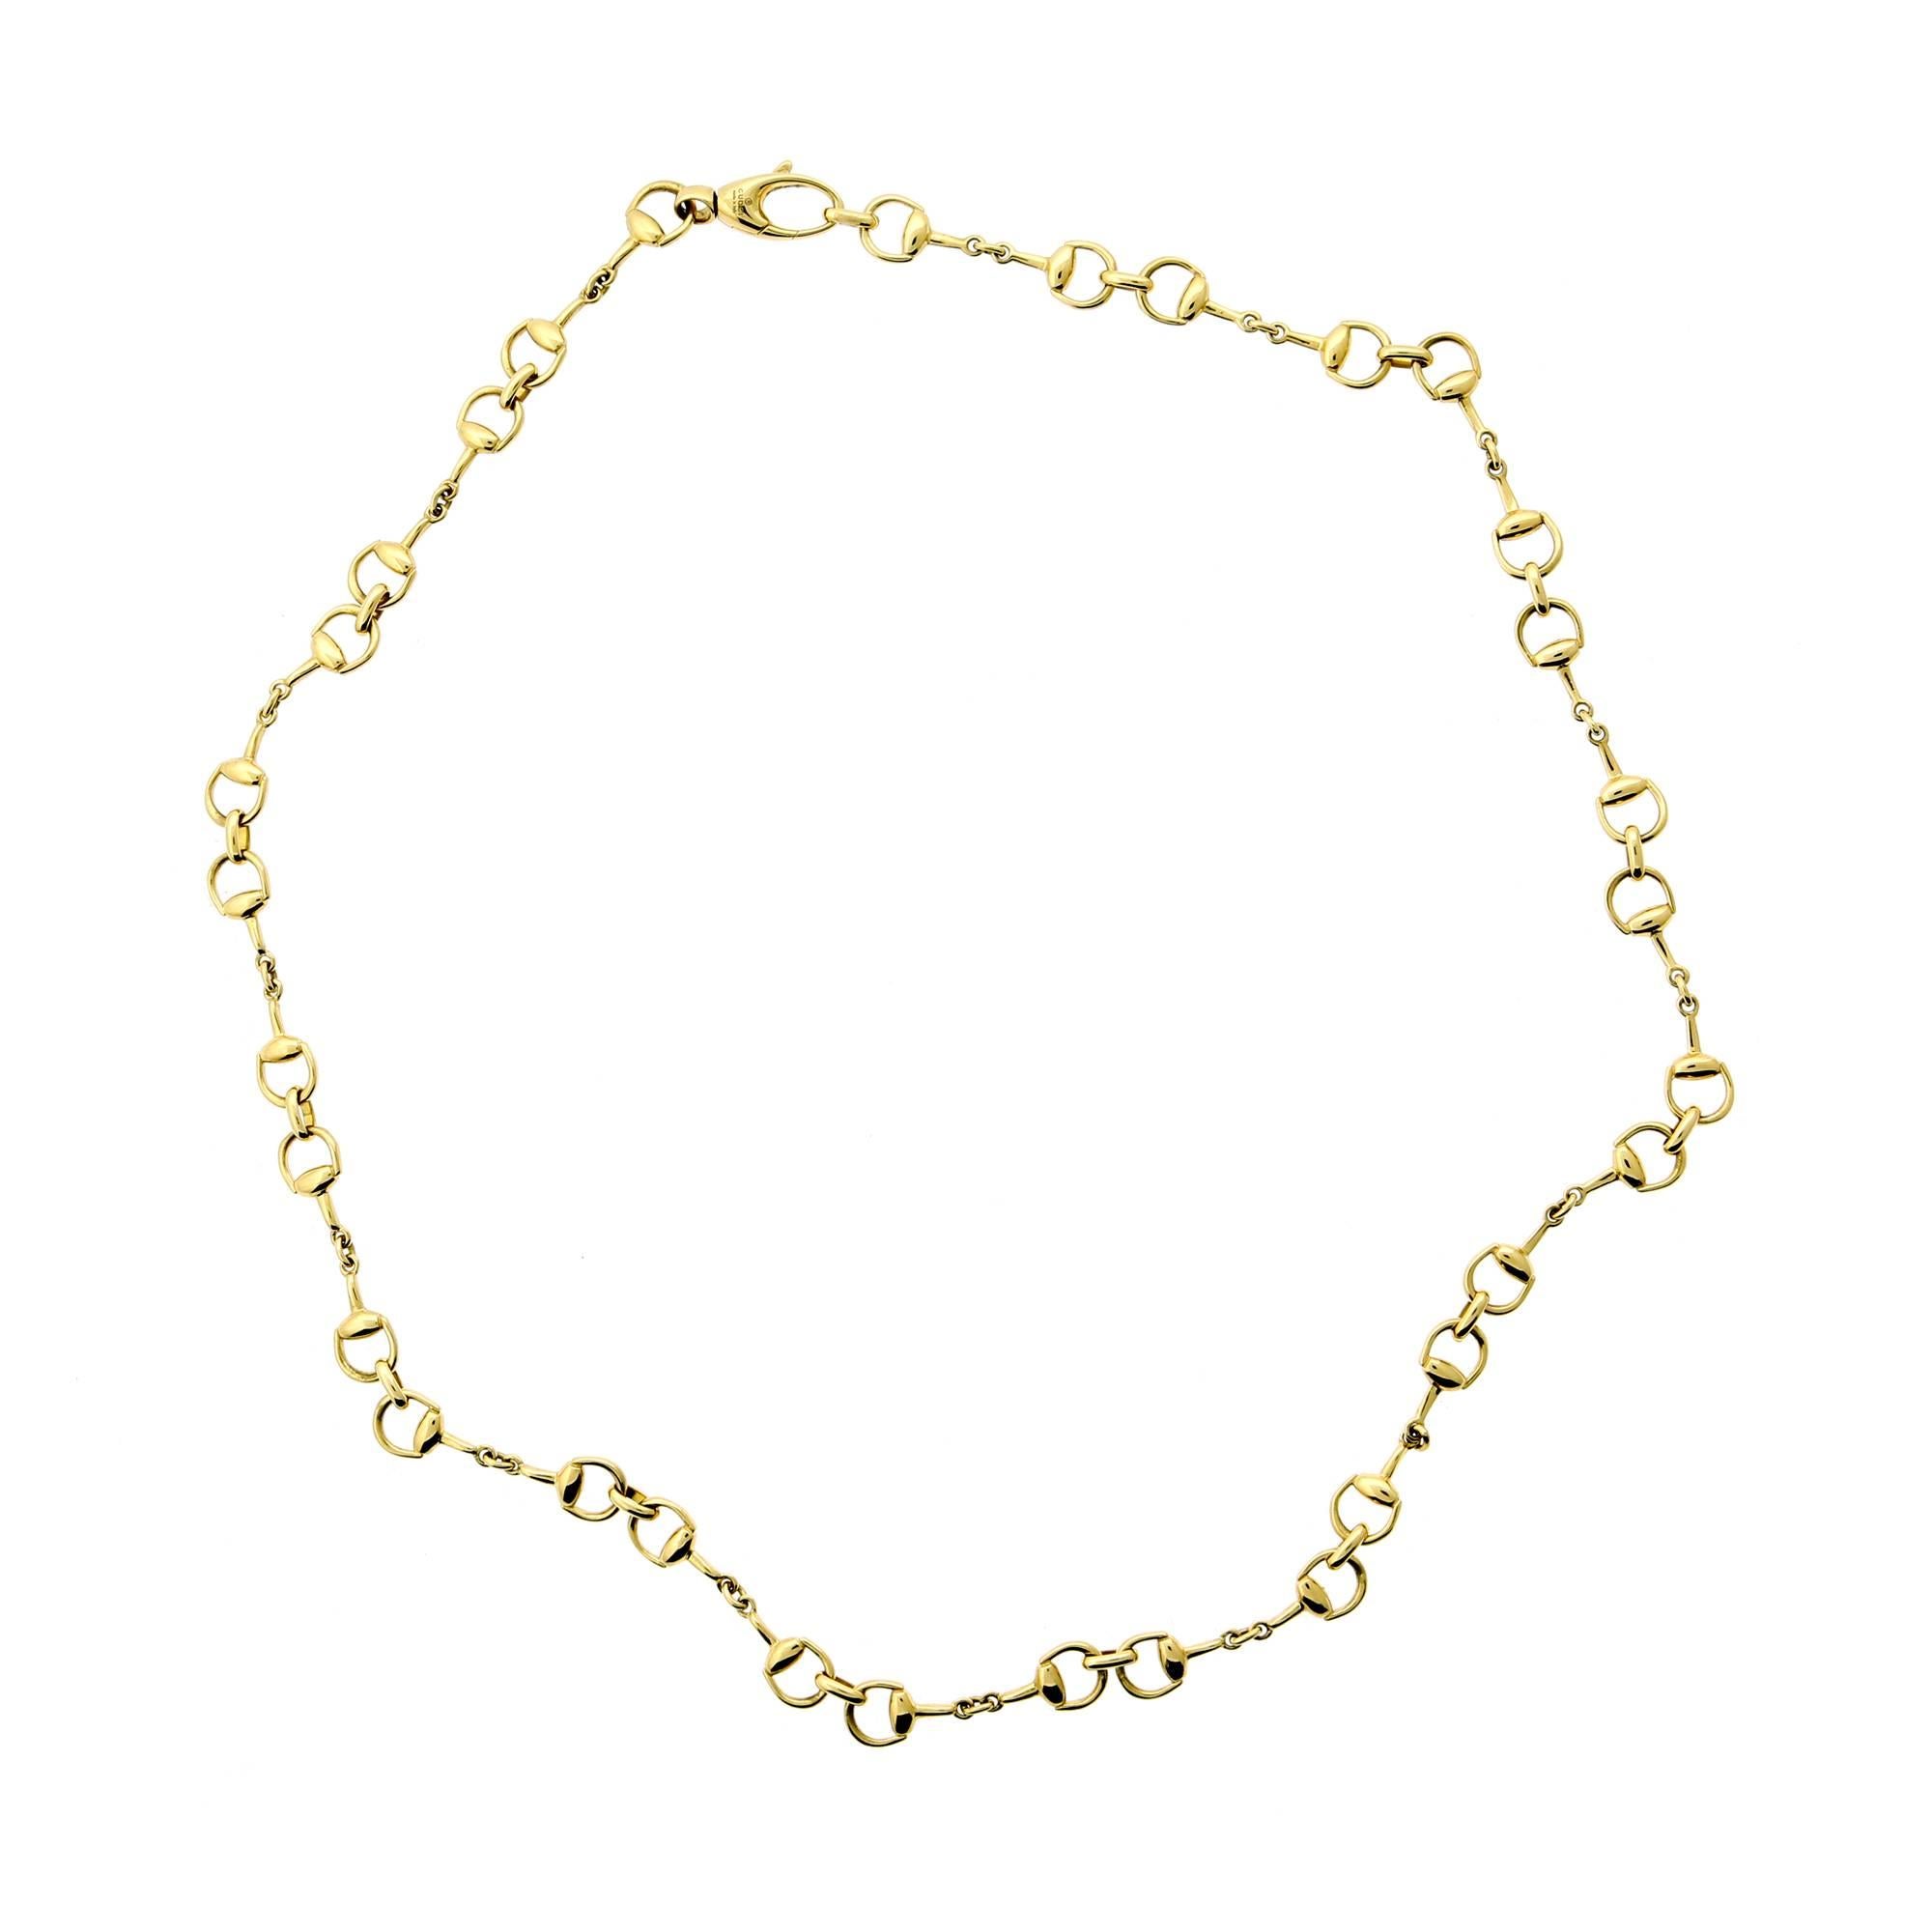 An iconic Gucci necklace featuring the Horsebit motif crafted in 18k yellow gold.
Necklace length 16".

Inventory ID: 0000283